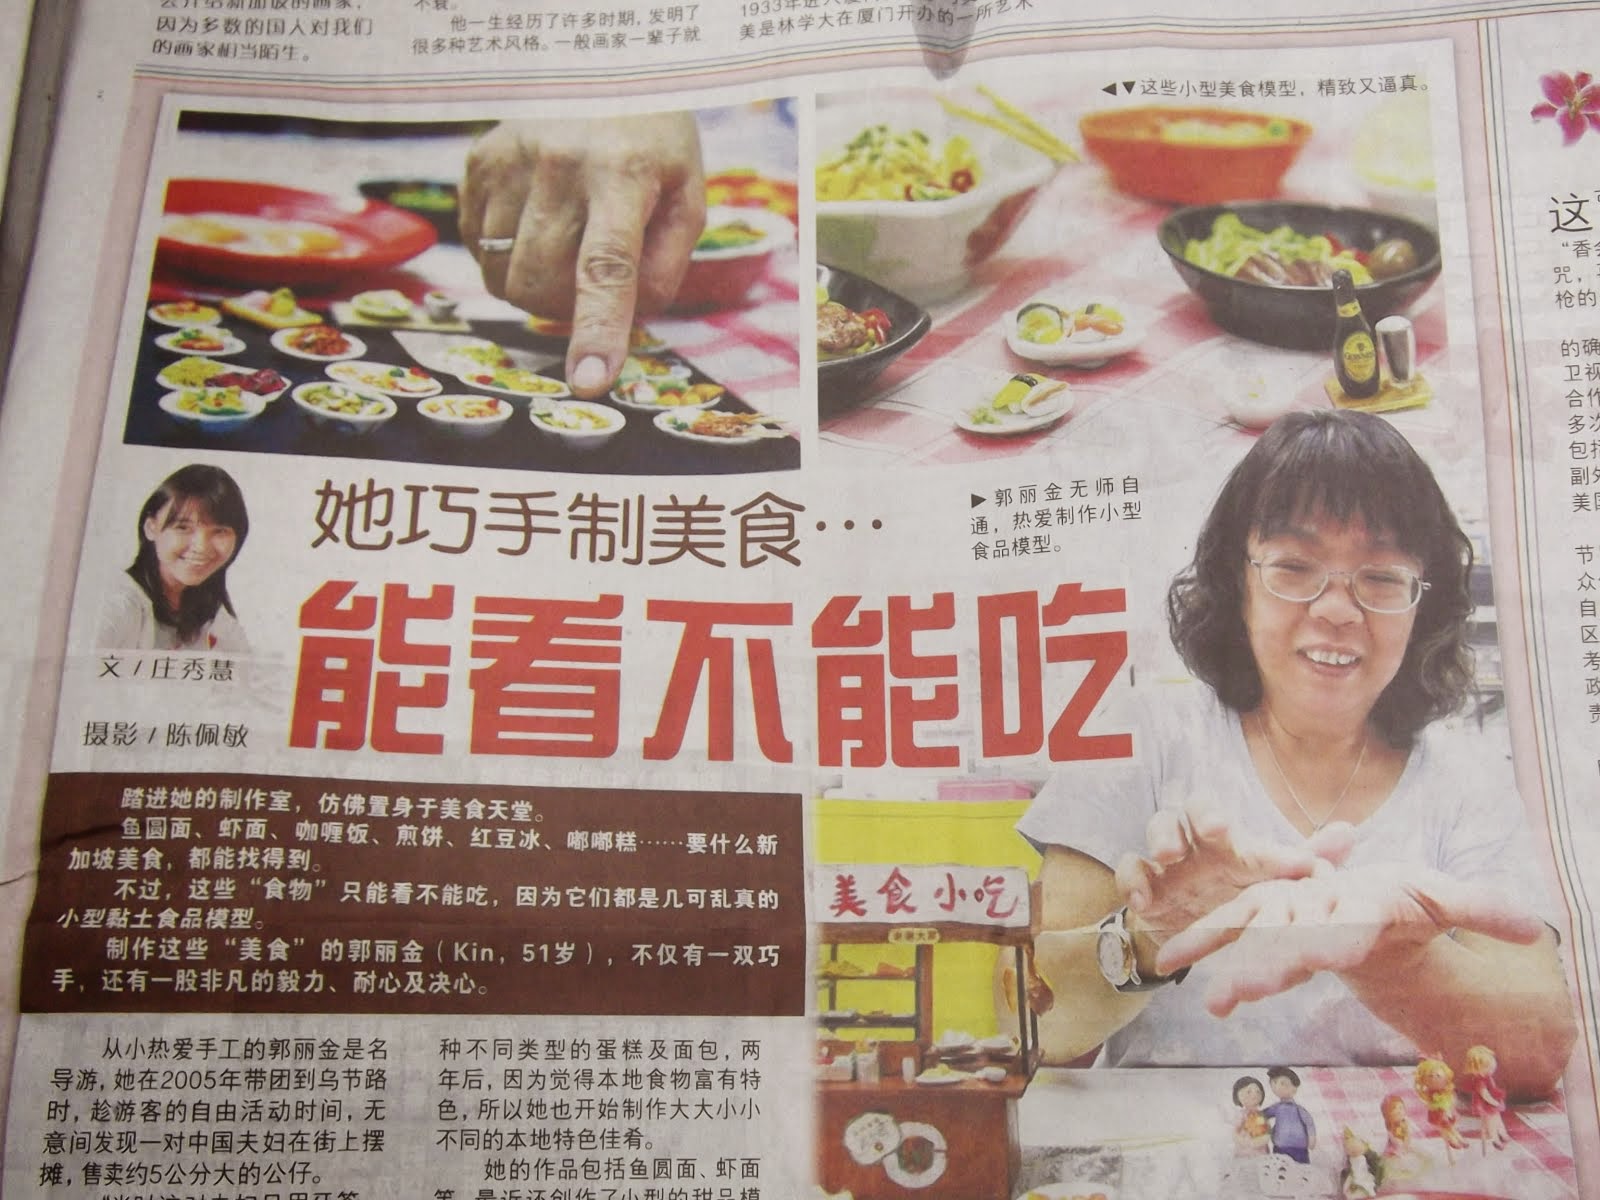 Featured on  新明日报 7th June 2014